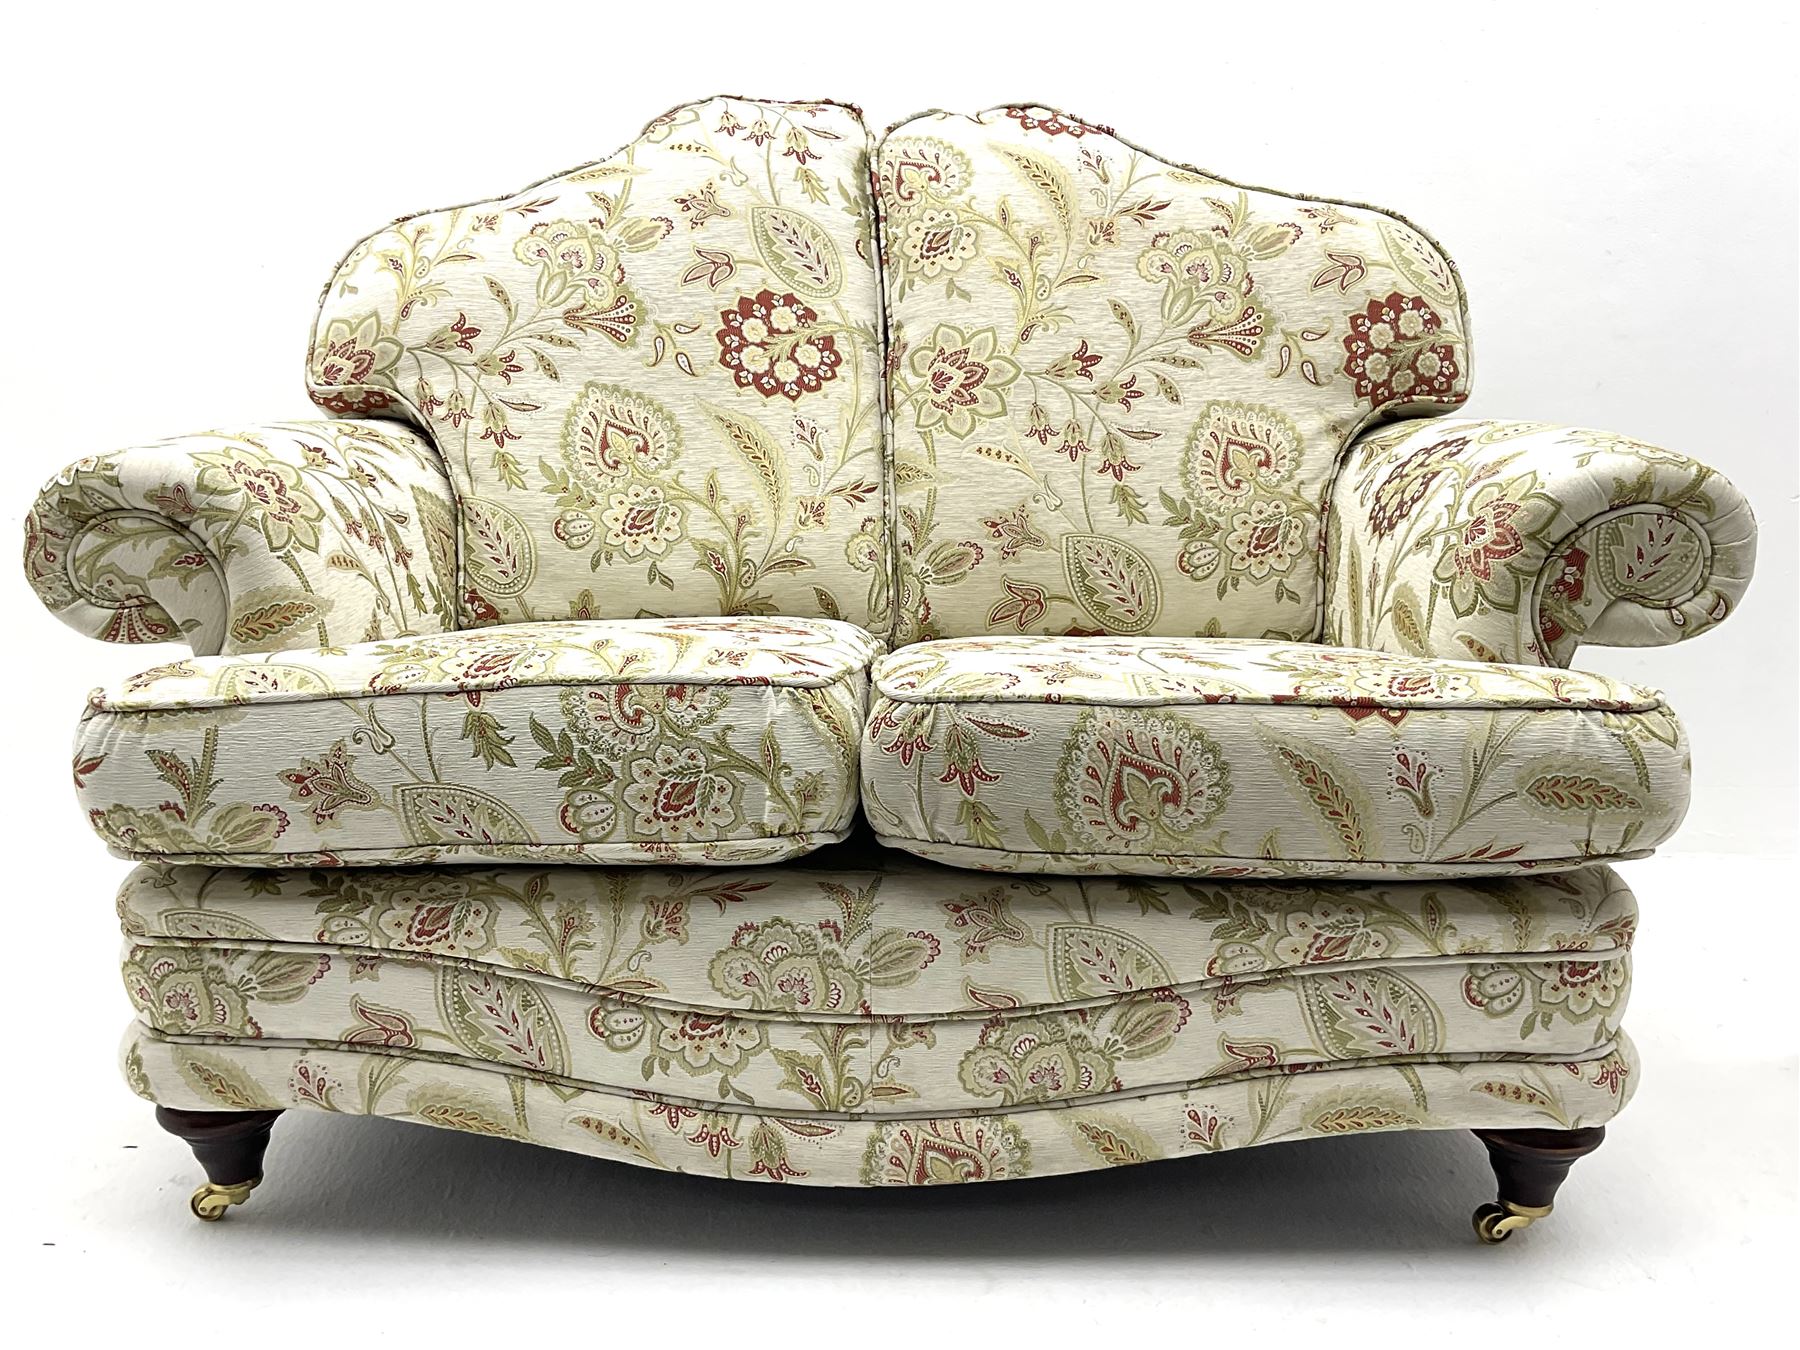 Pair traditional shaped two seat sofas upholstered in floral pattern and cream ground fabric